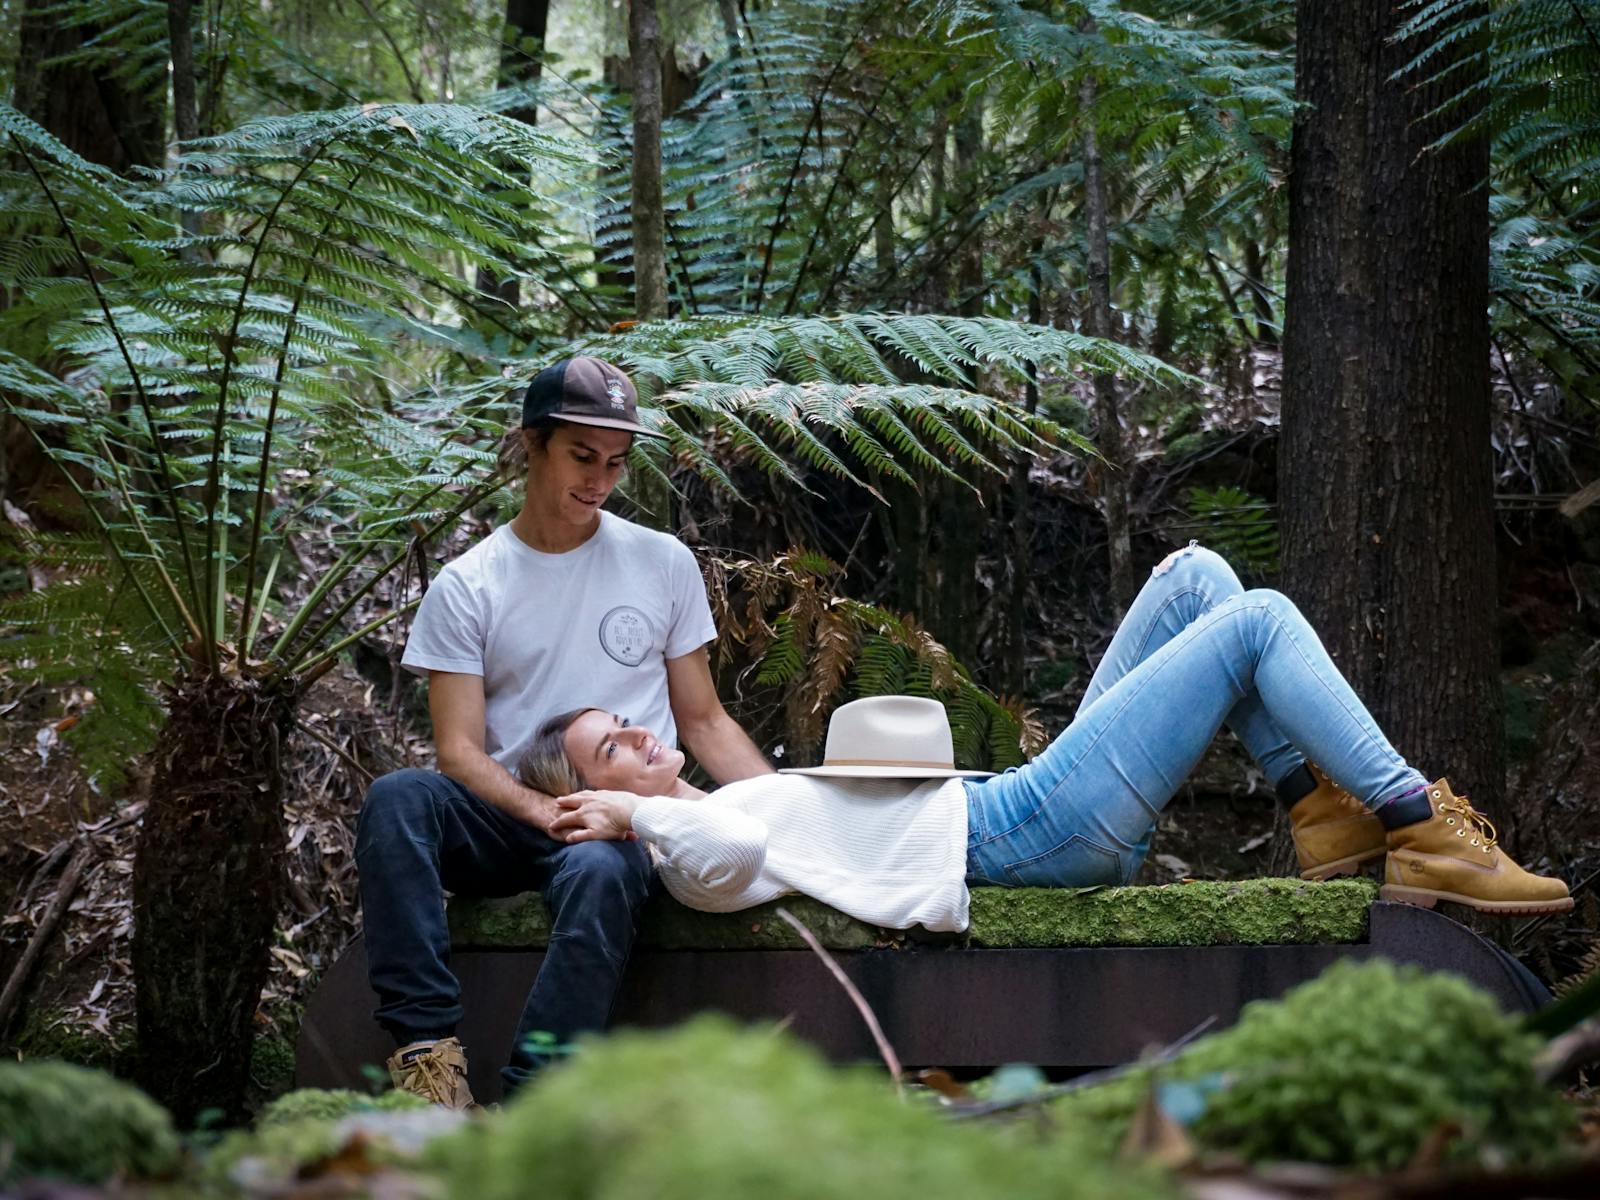 A young couple lying on a stone bench surrounded by tree ferns